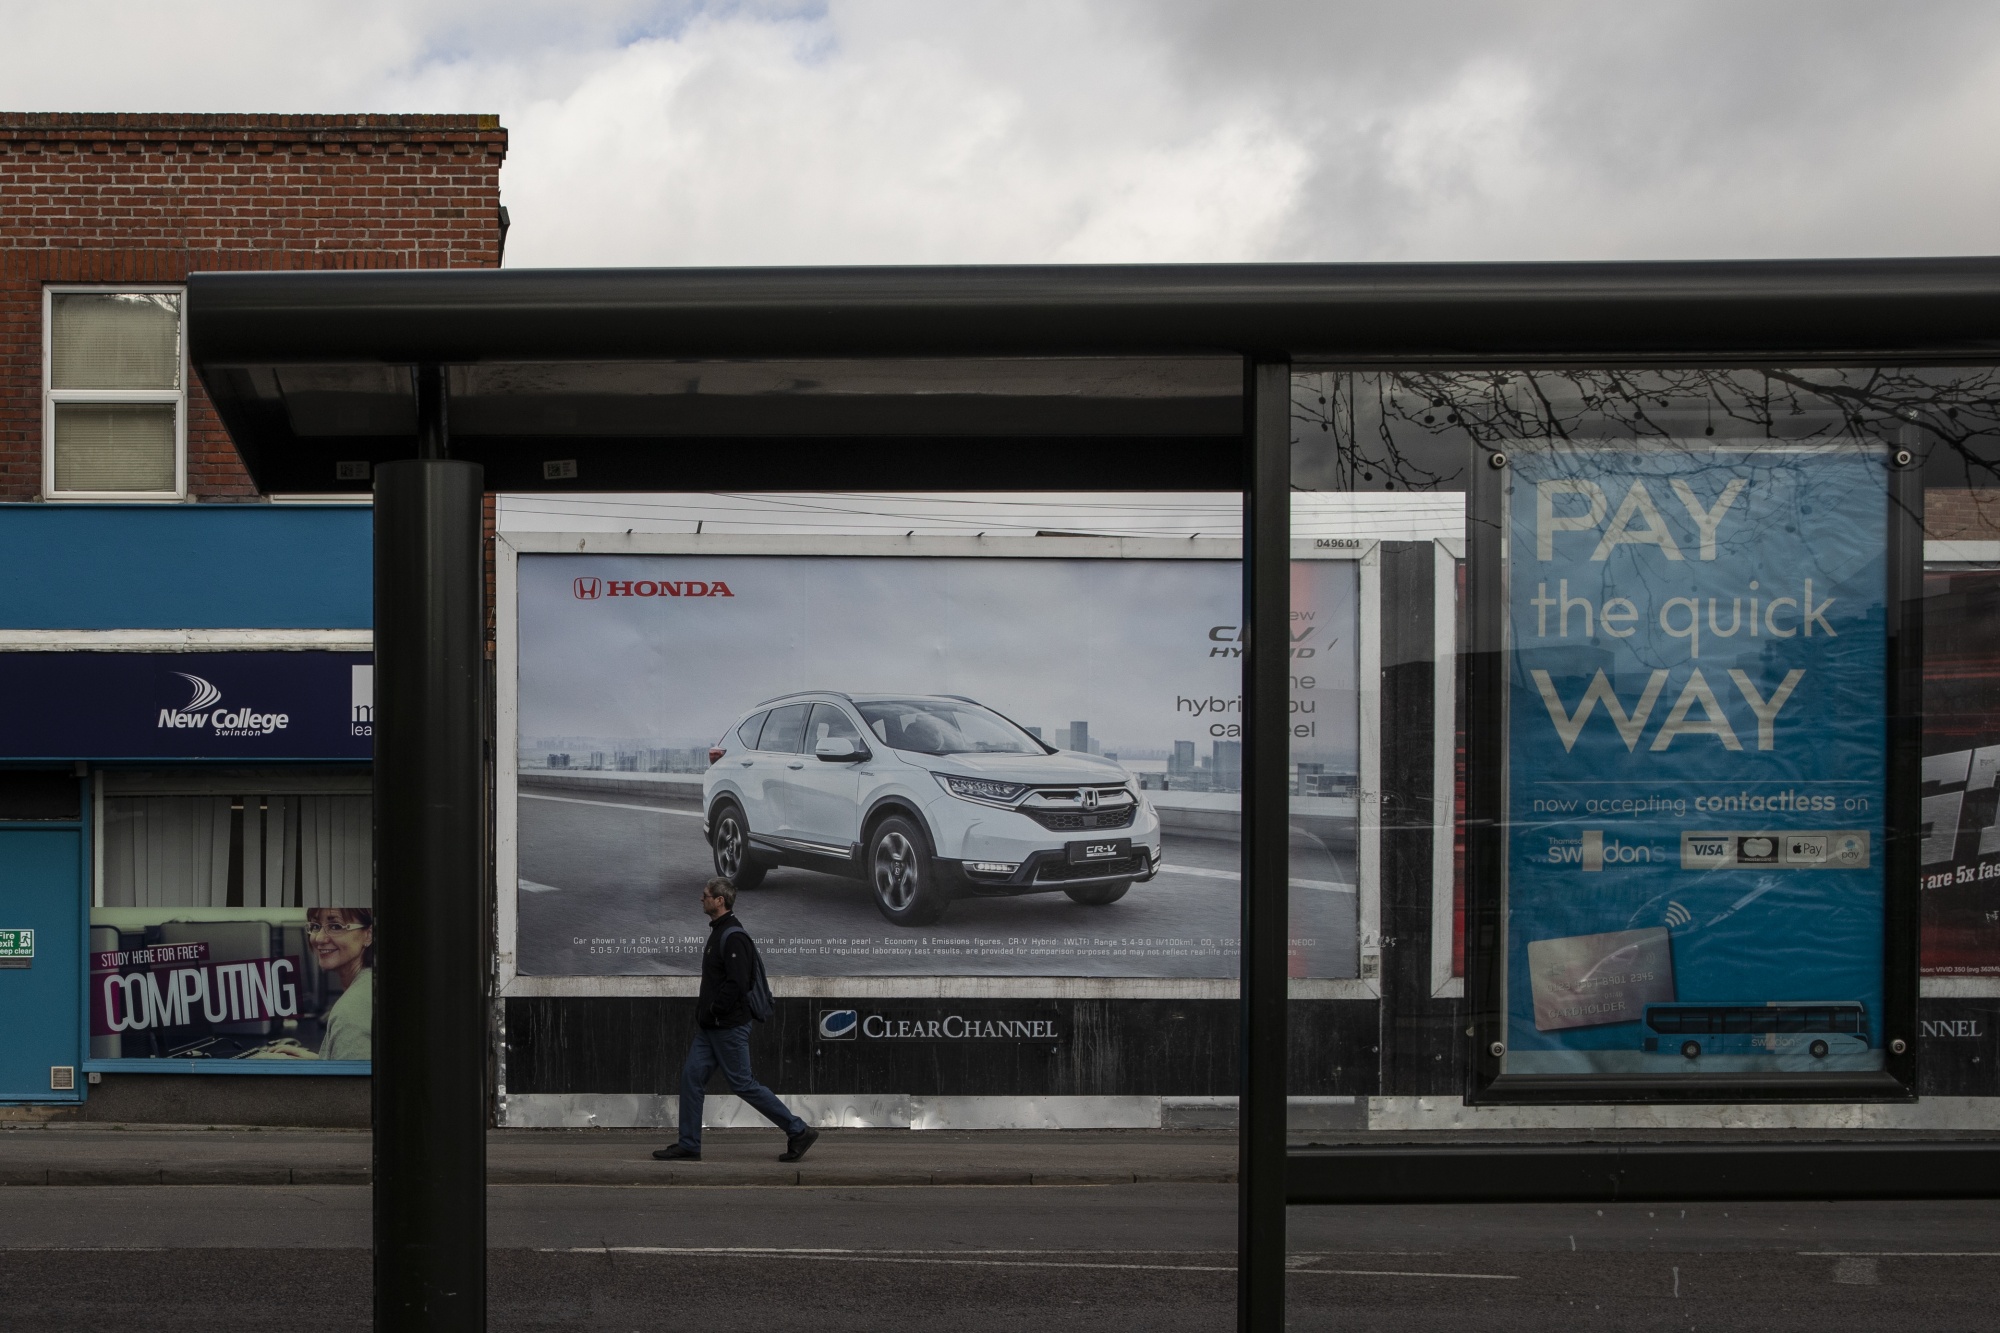 A poster advertising Honda cars in Swindon, England.